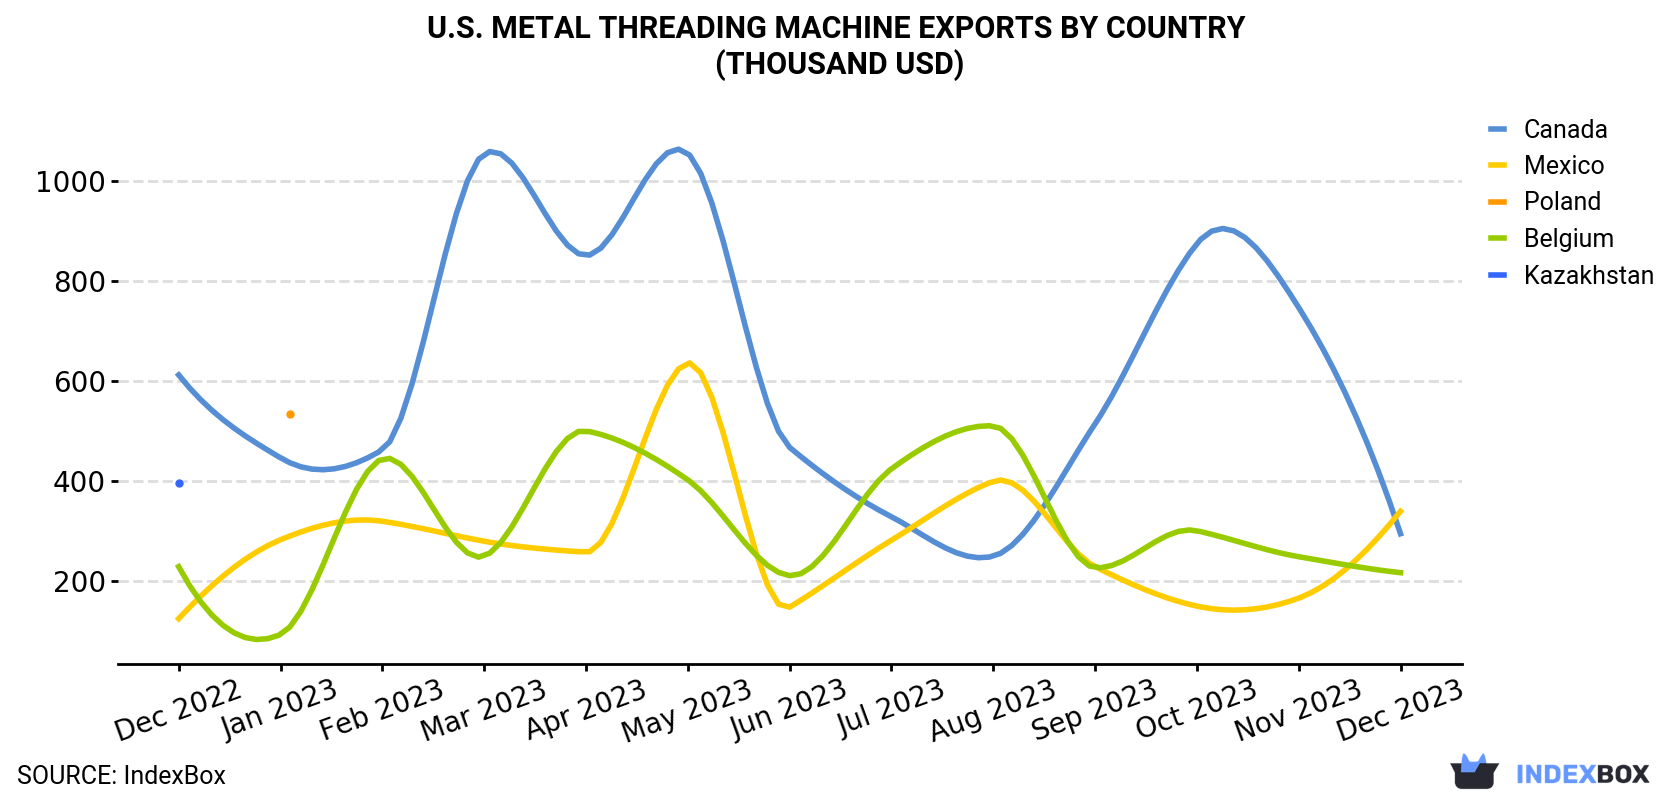 U.S. Metal Threading Machine Exports By Country (Thousand USD)